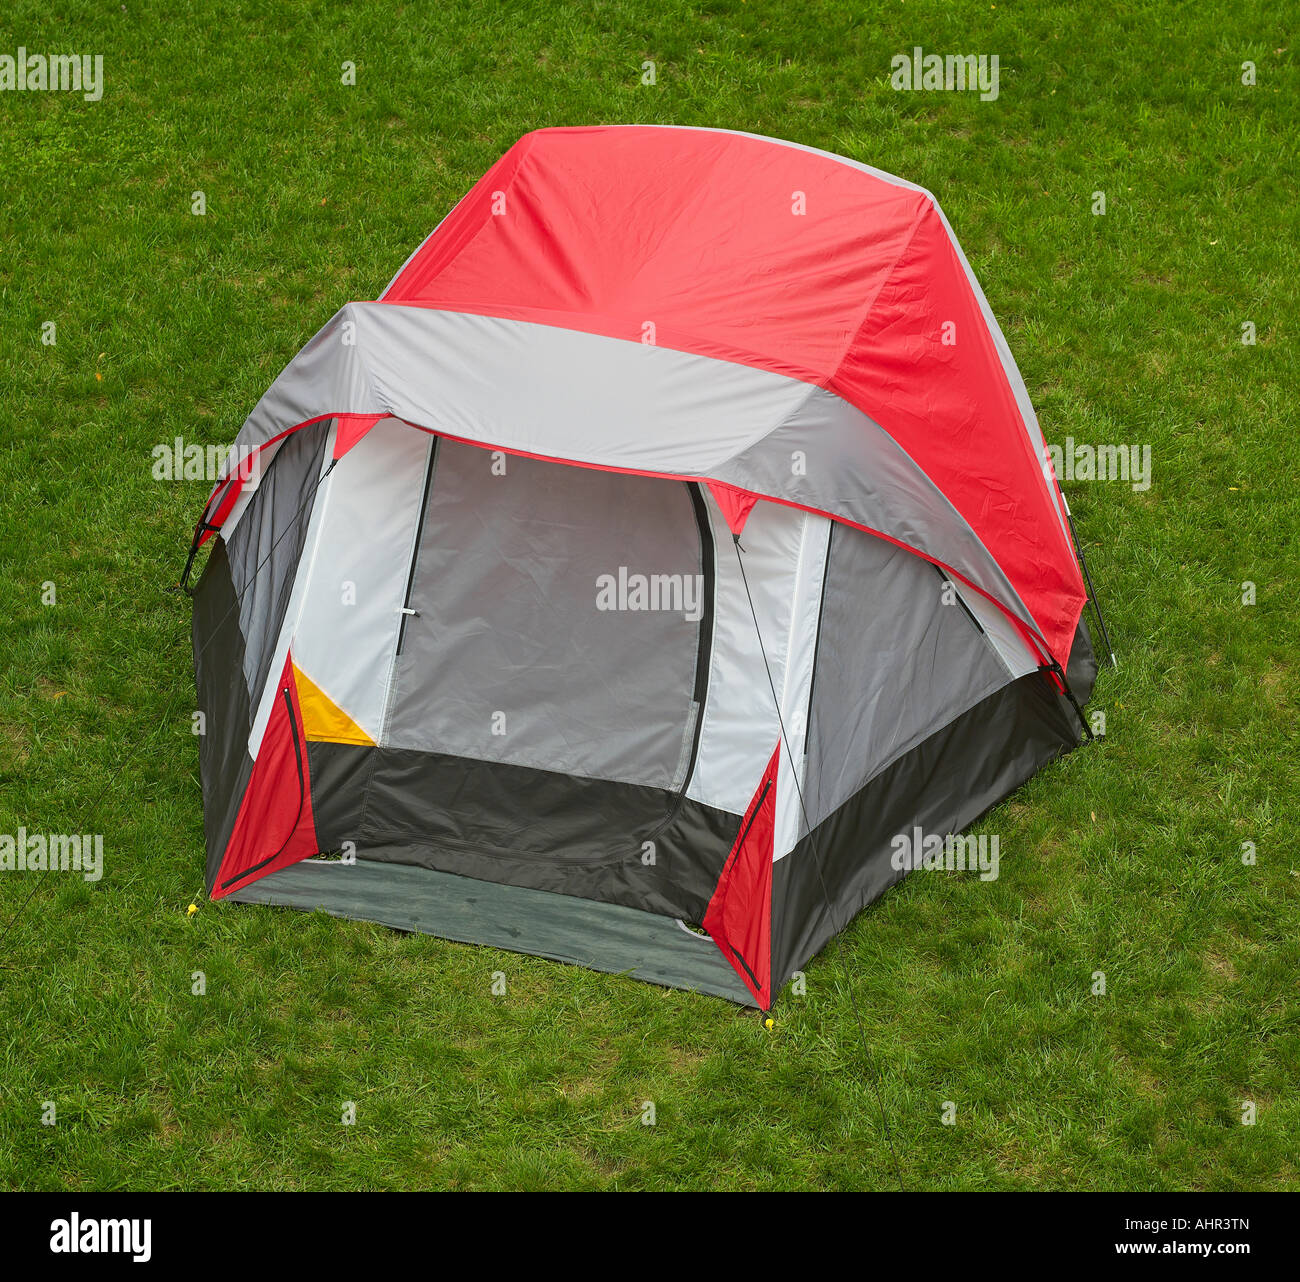 Tent on grass Stock Photo